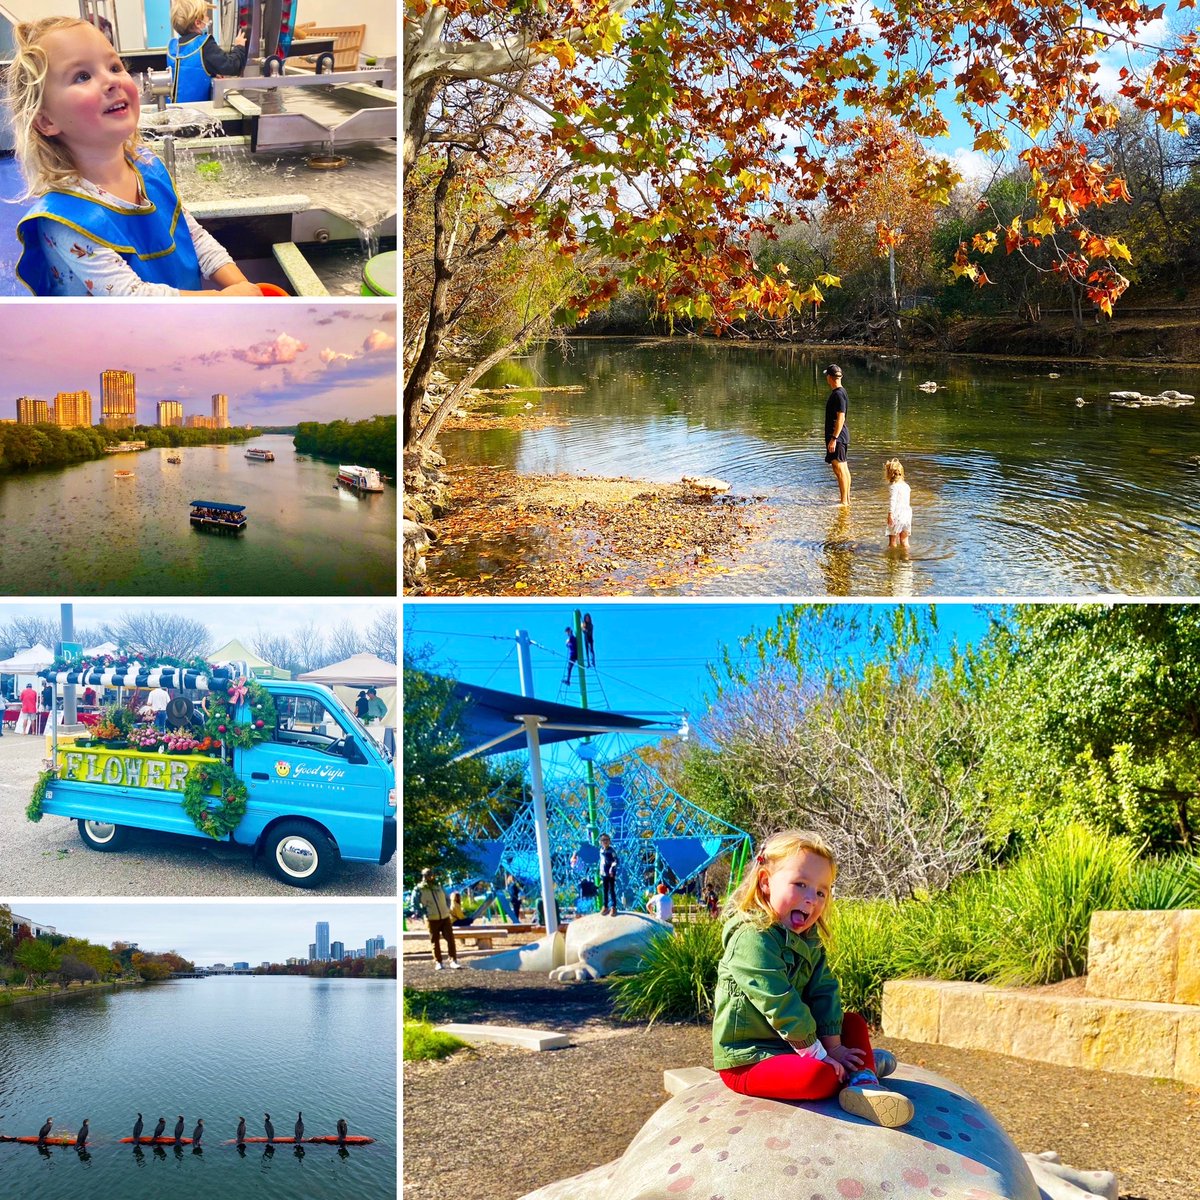 My NEW #travel guide: My Favorite Things to Do with Kids in #Austin bit.ly/kid-activities… #familytravel #travelblogger #atx #roadtrip #ontheblog #funwithkids